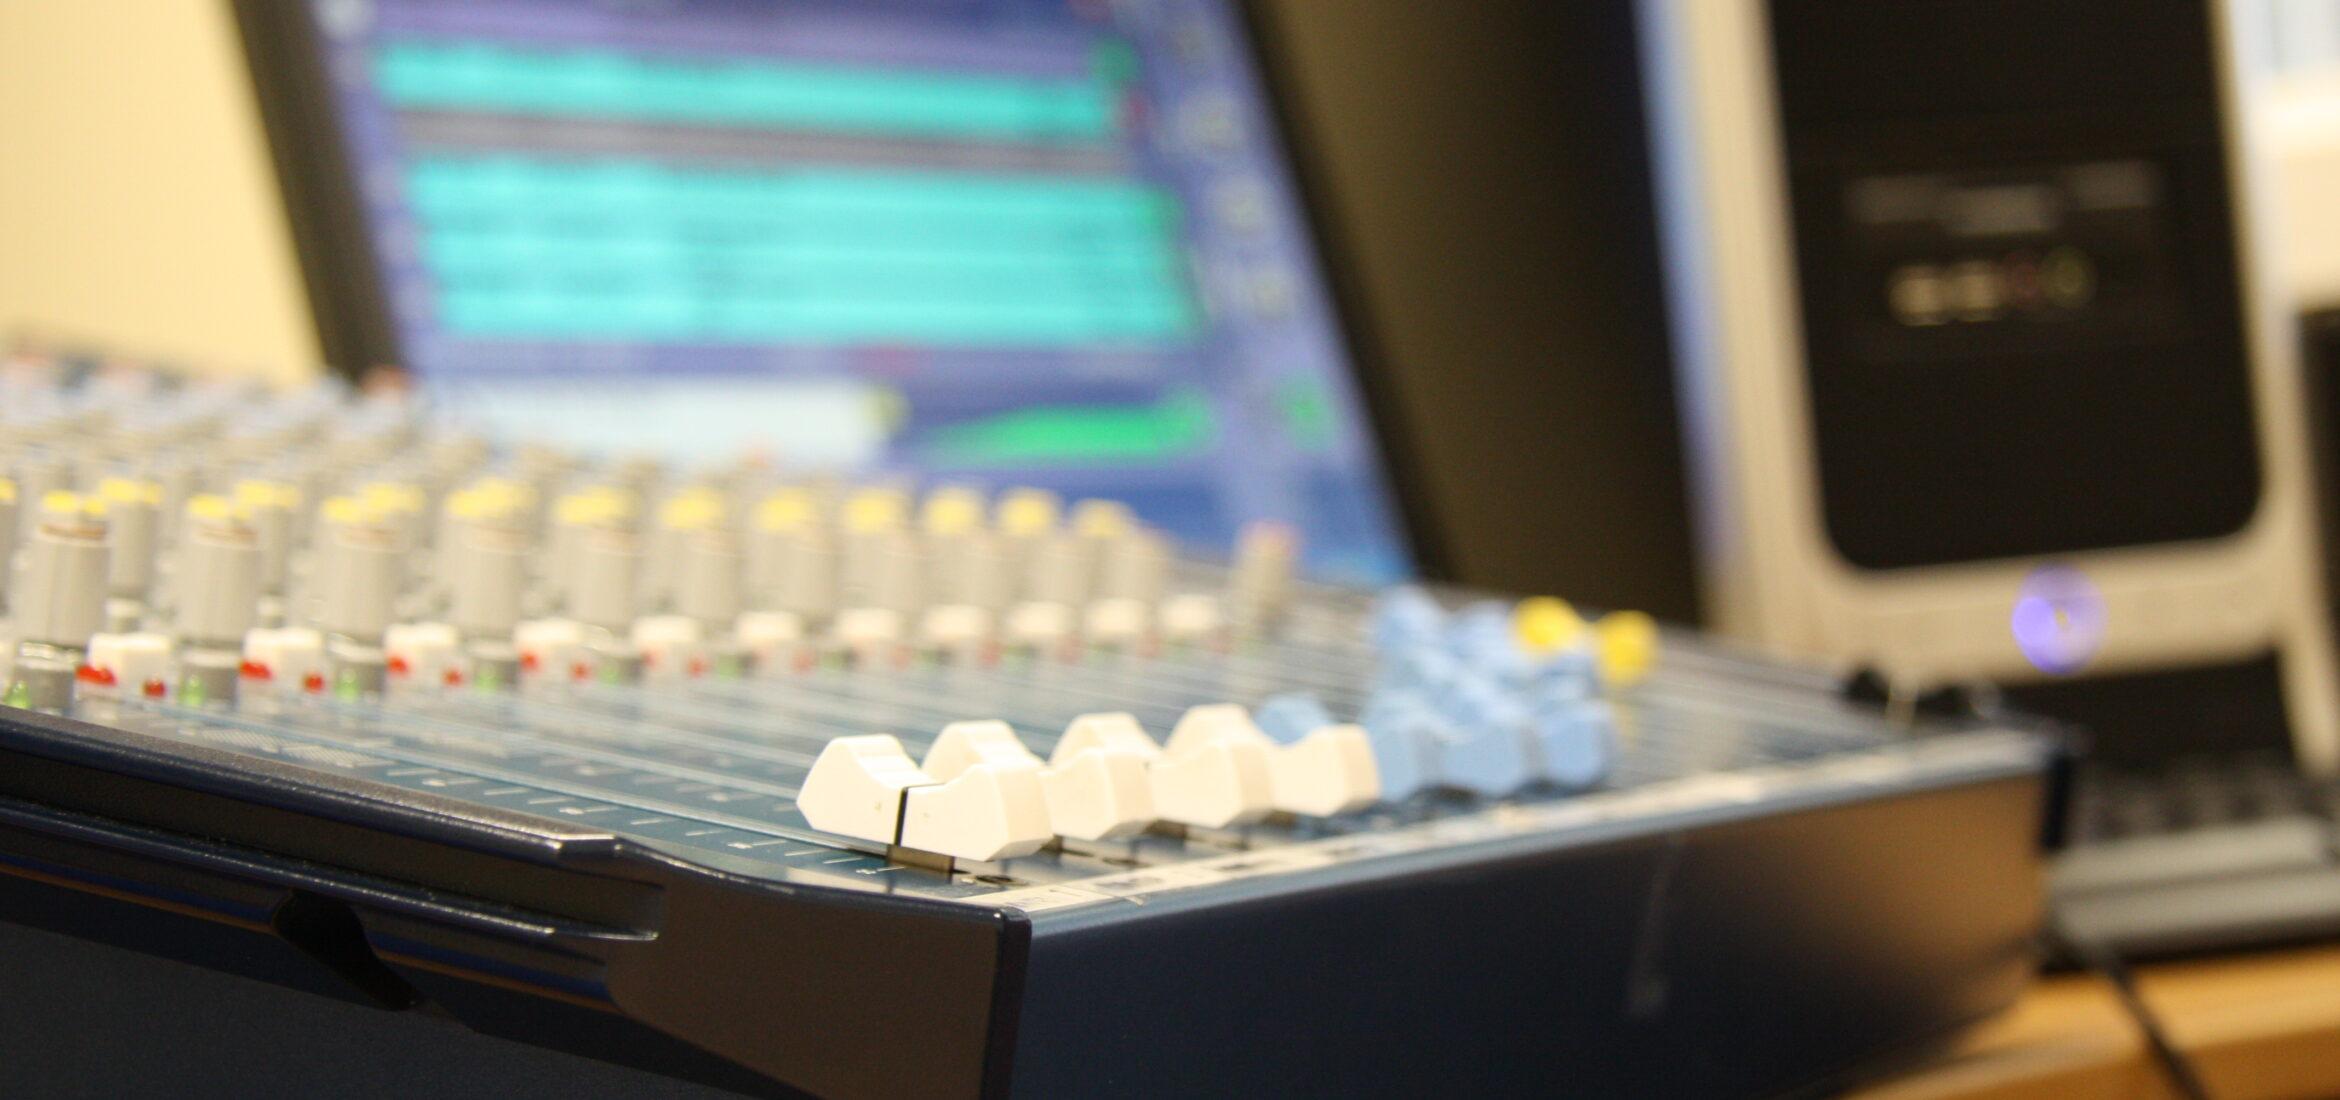 7 Mixing Mistakes You Need to Avoid